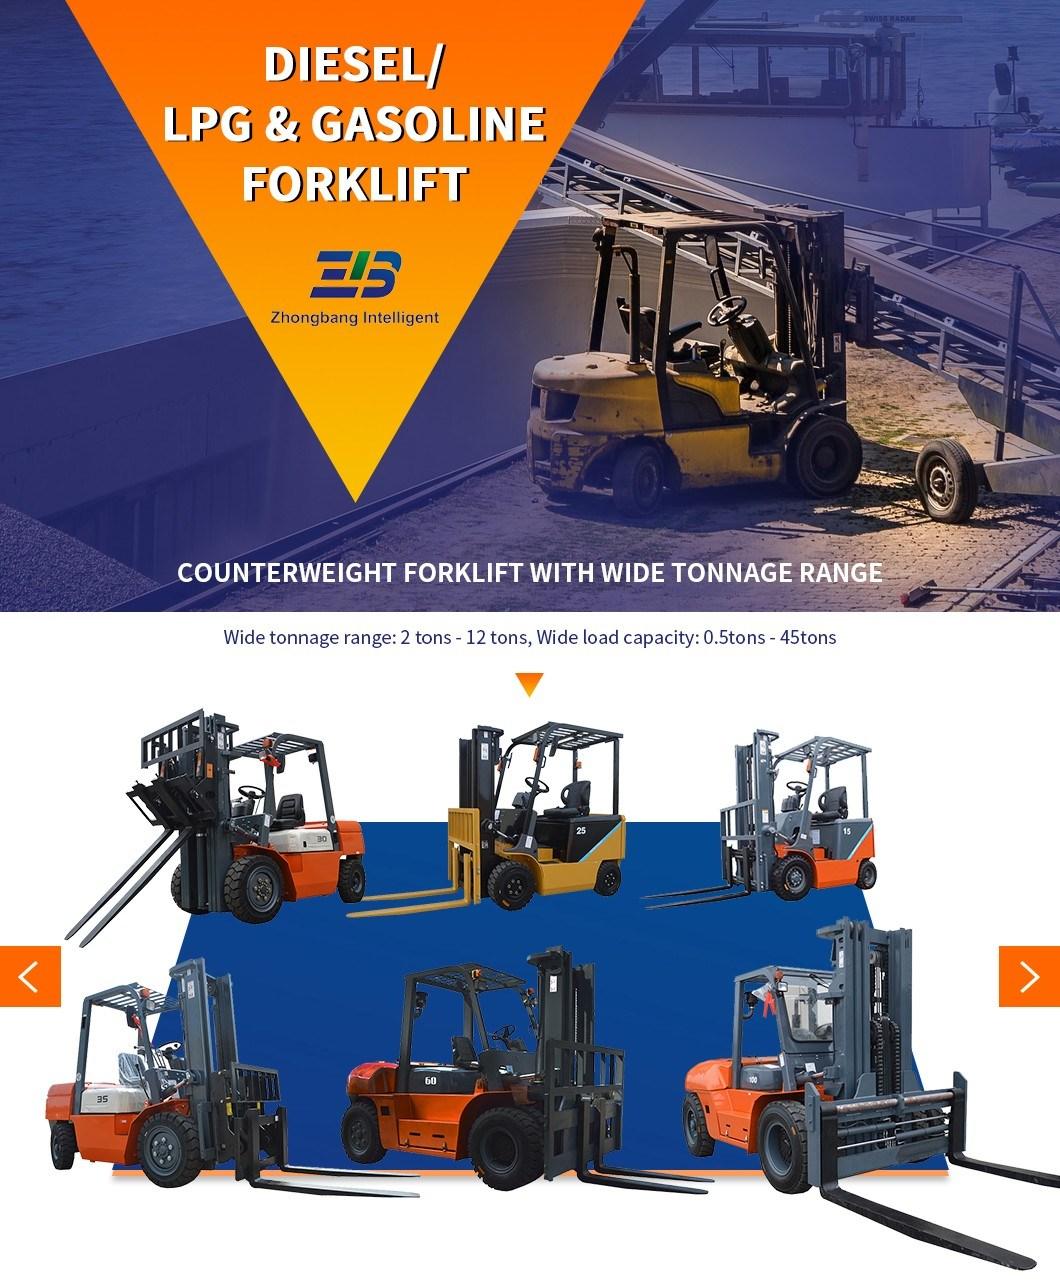 Full-Free Lift Mast Diesel Forklift 2ton for Fort with Good Stability